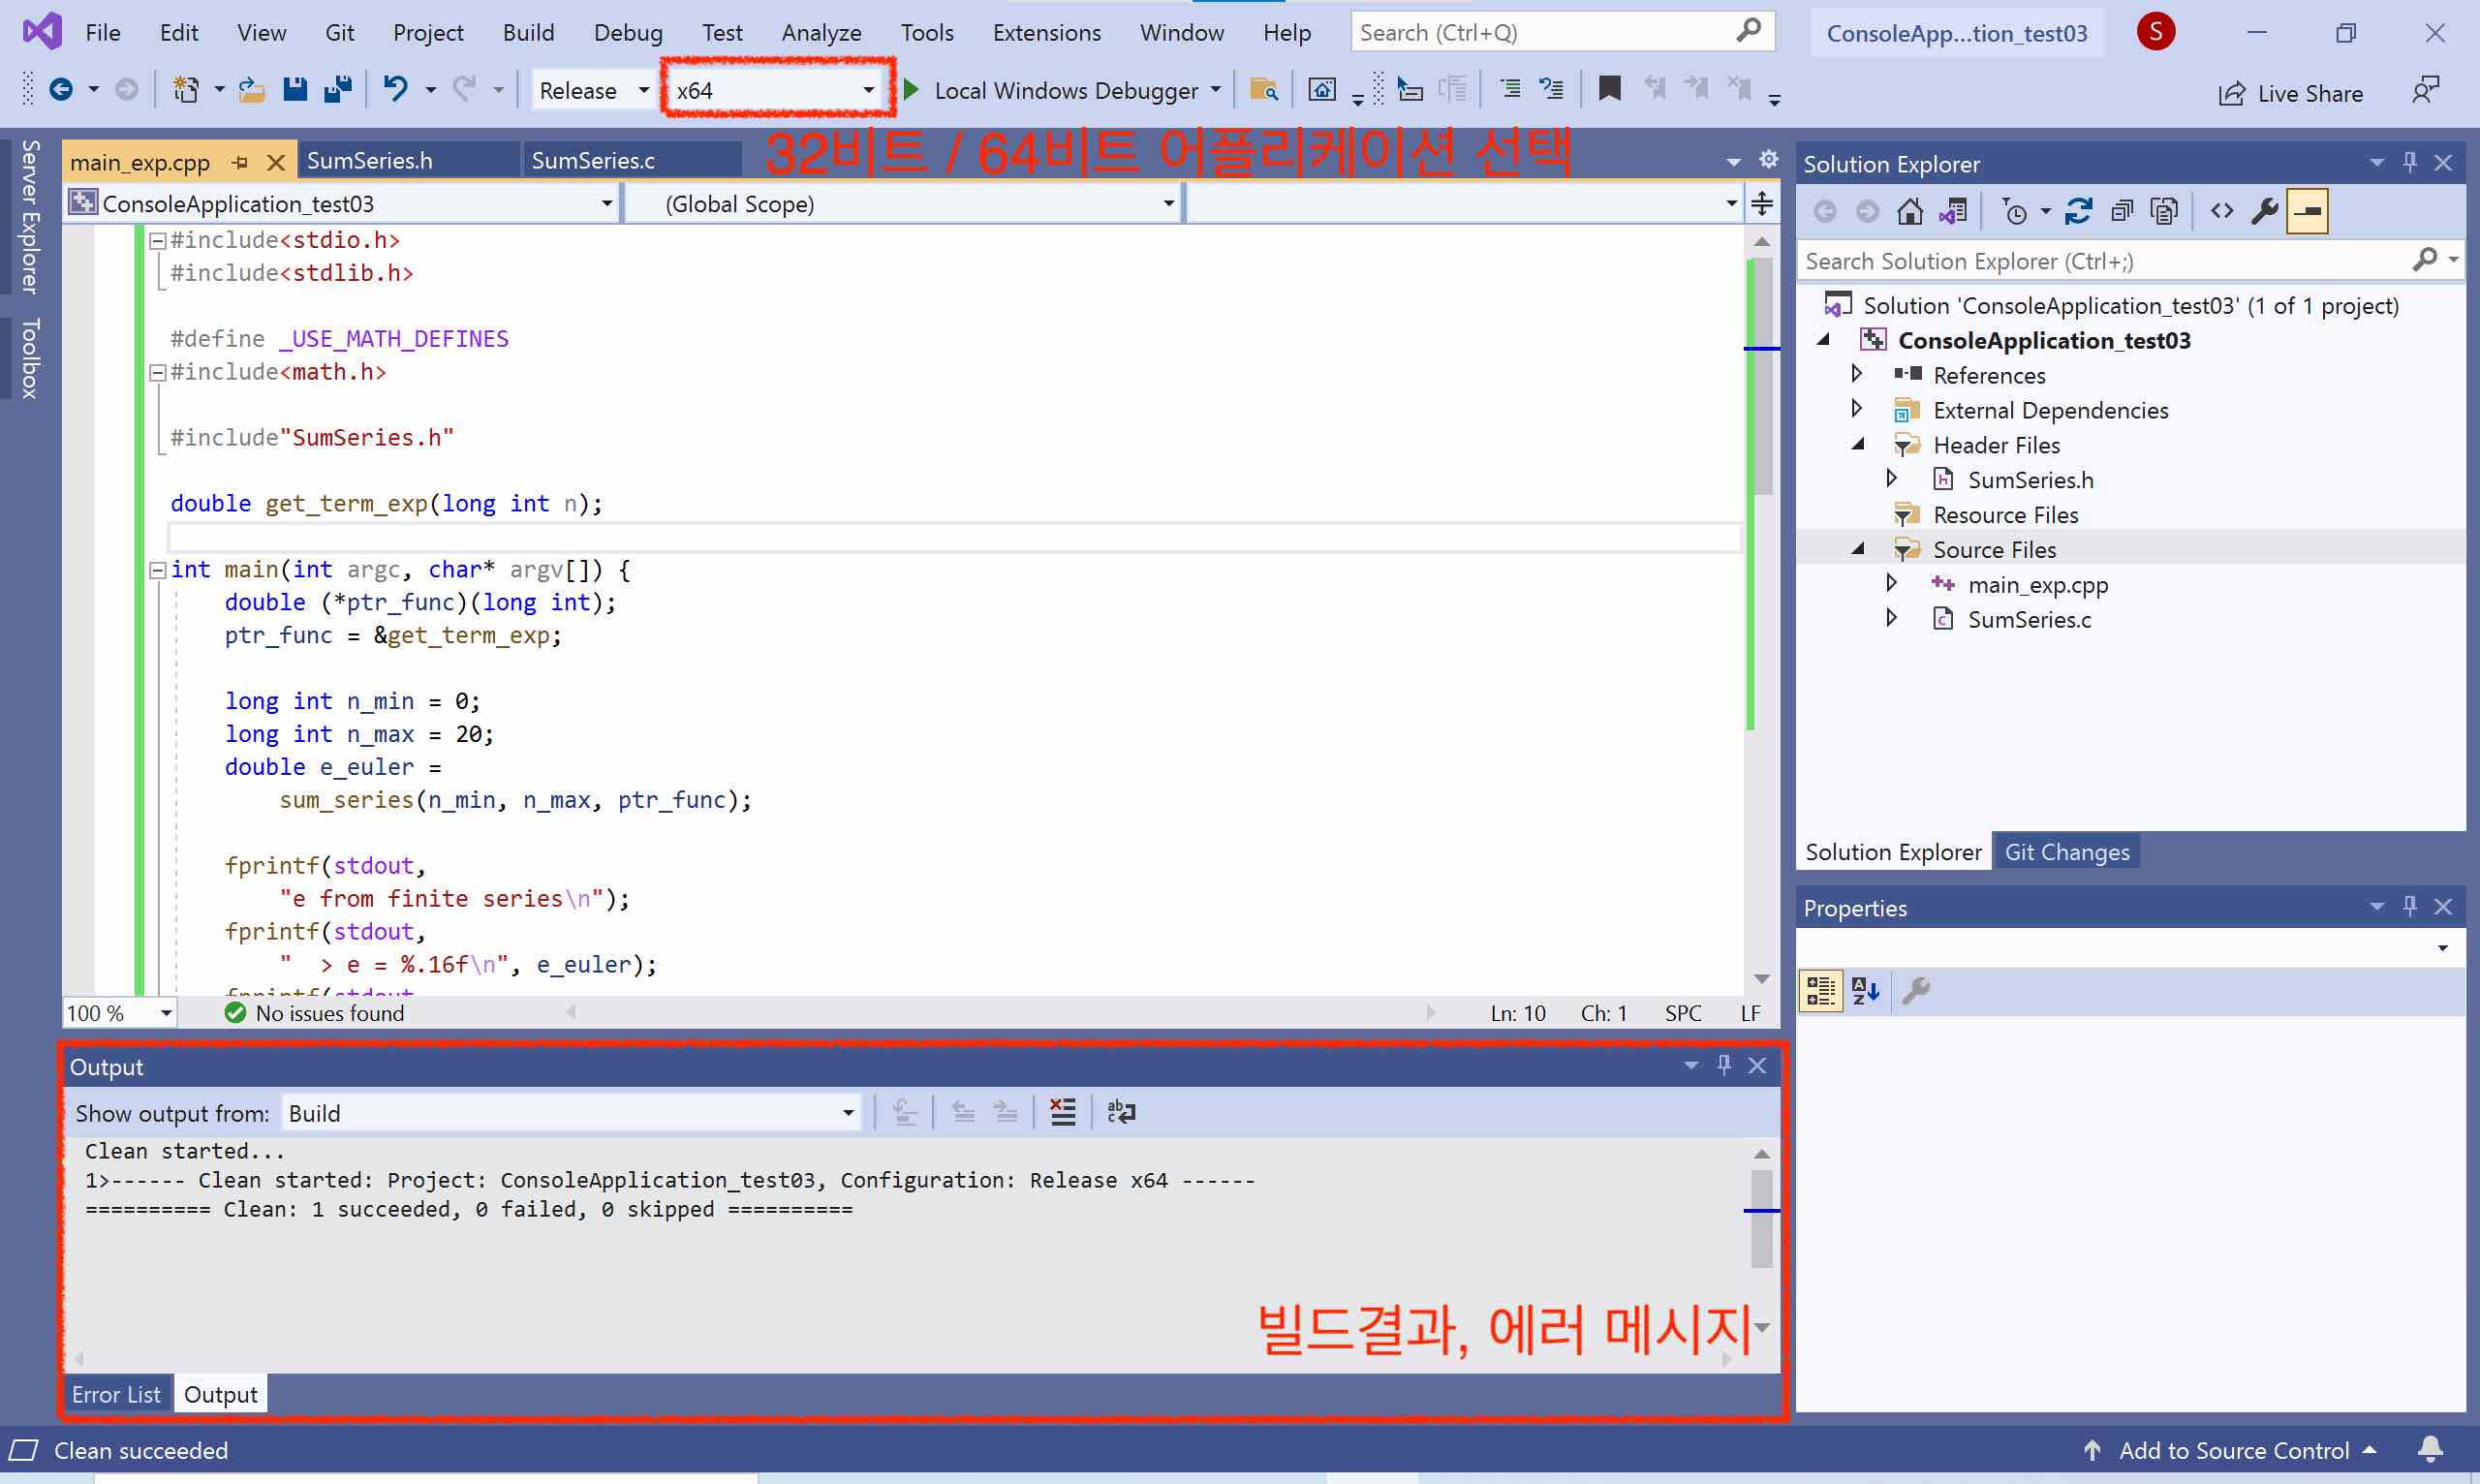 screenshot of Visual Studio 2019, showing the main screen with a sample C++ source file